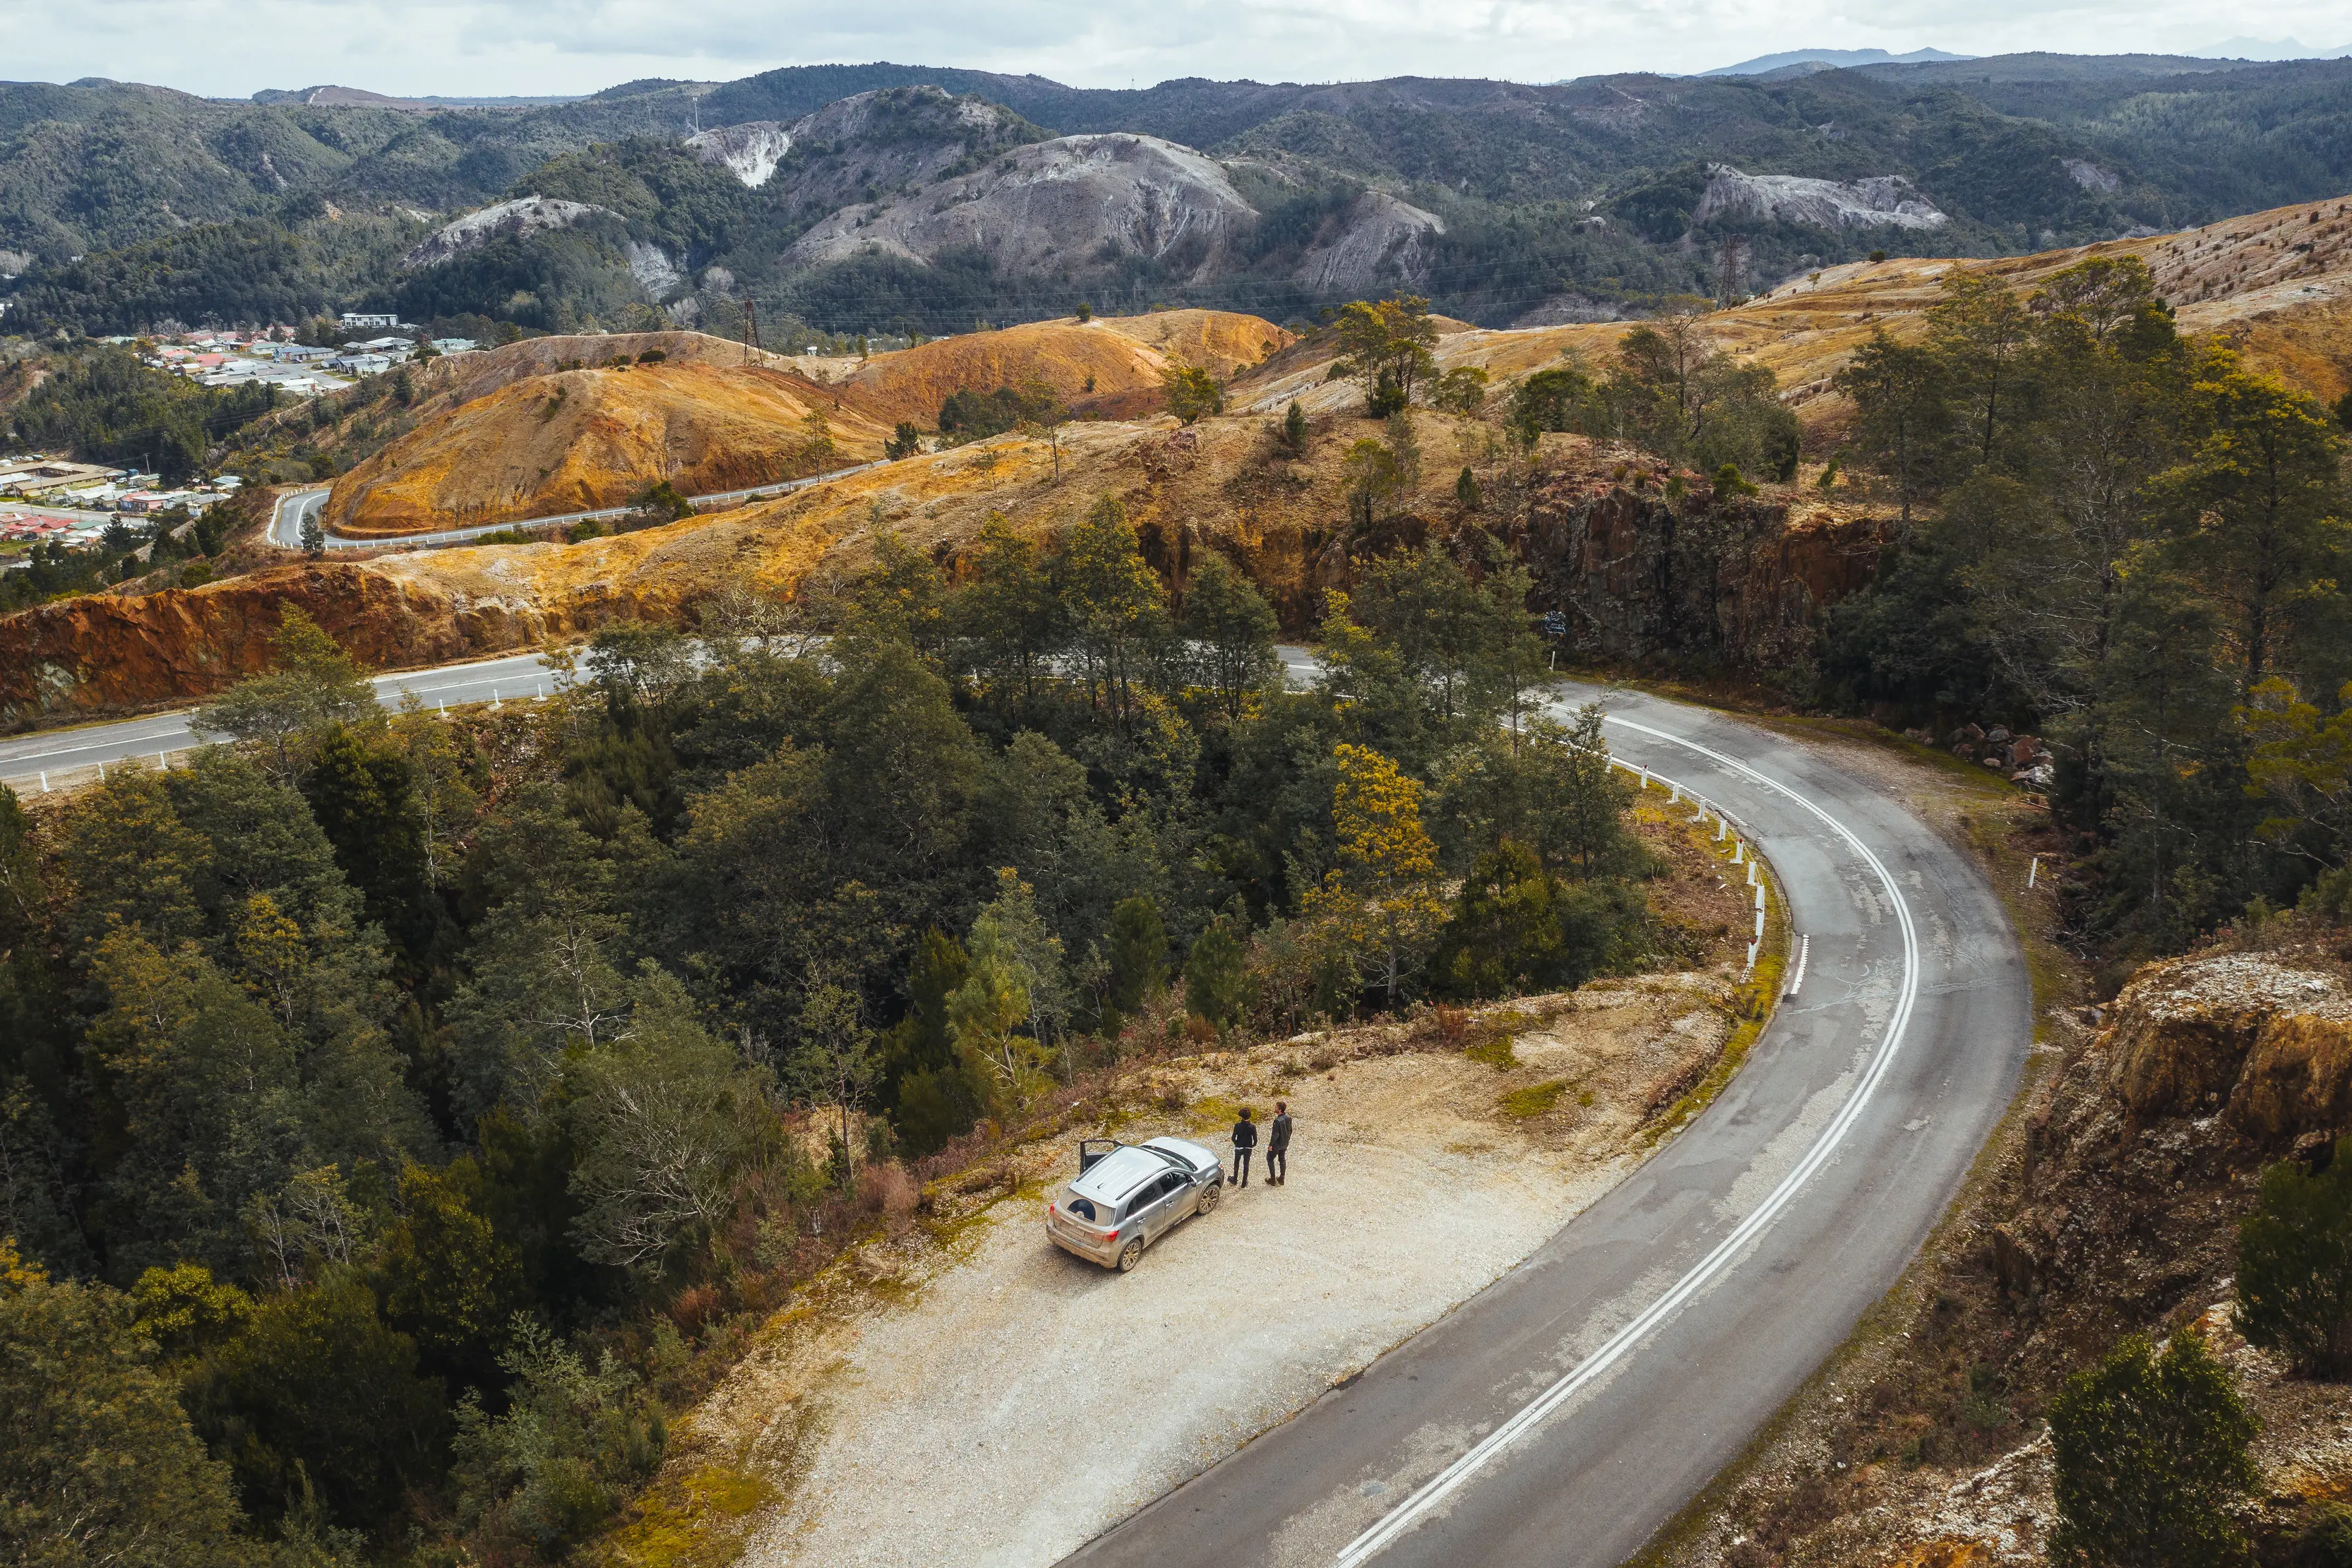 Stunning aerial image of a car parked on the road to Queenstown, surrounded by forest, dramatic hills and mountains.